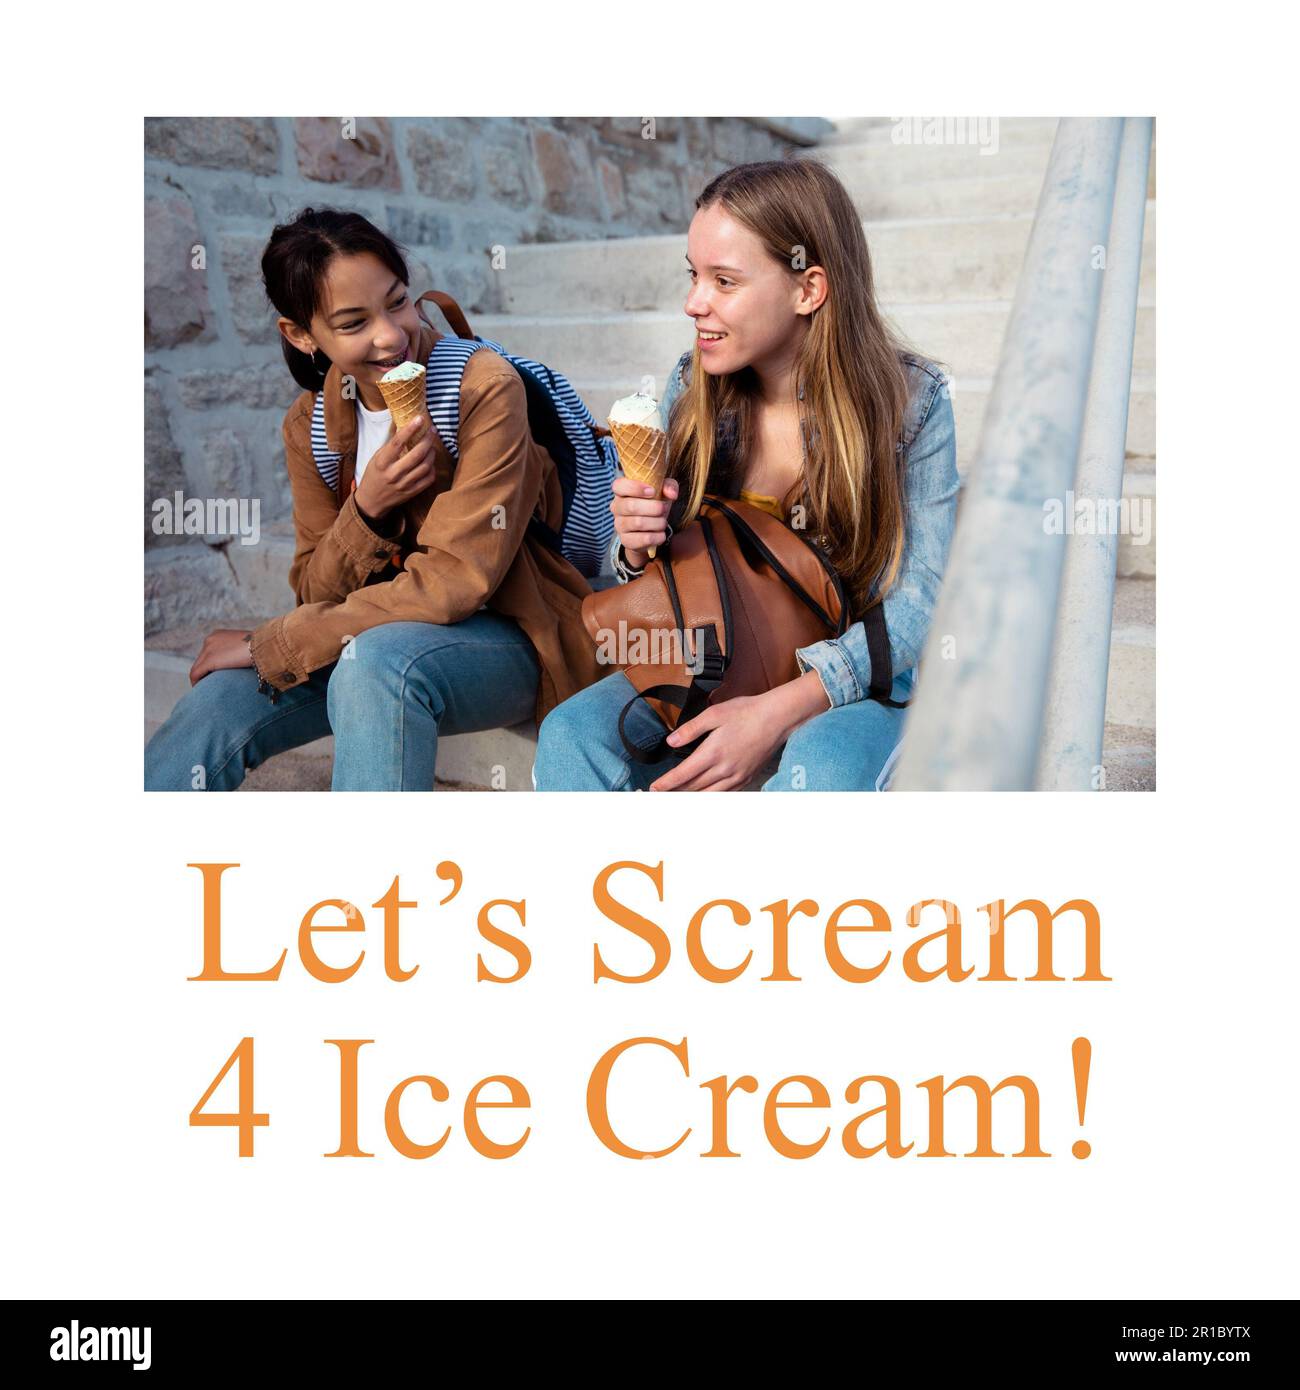 Composition of happy ice cream day text over diverse female friends eating ice cream Stock Photo